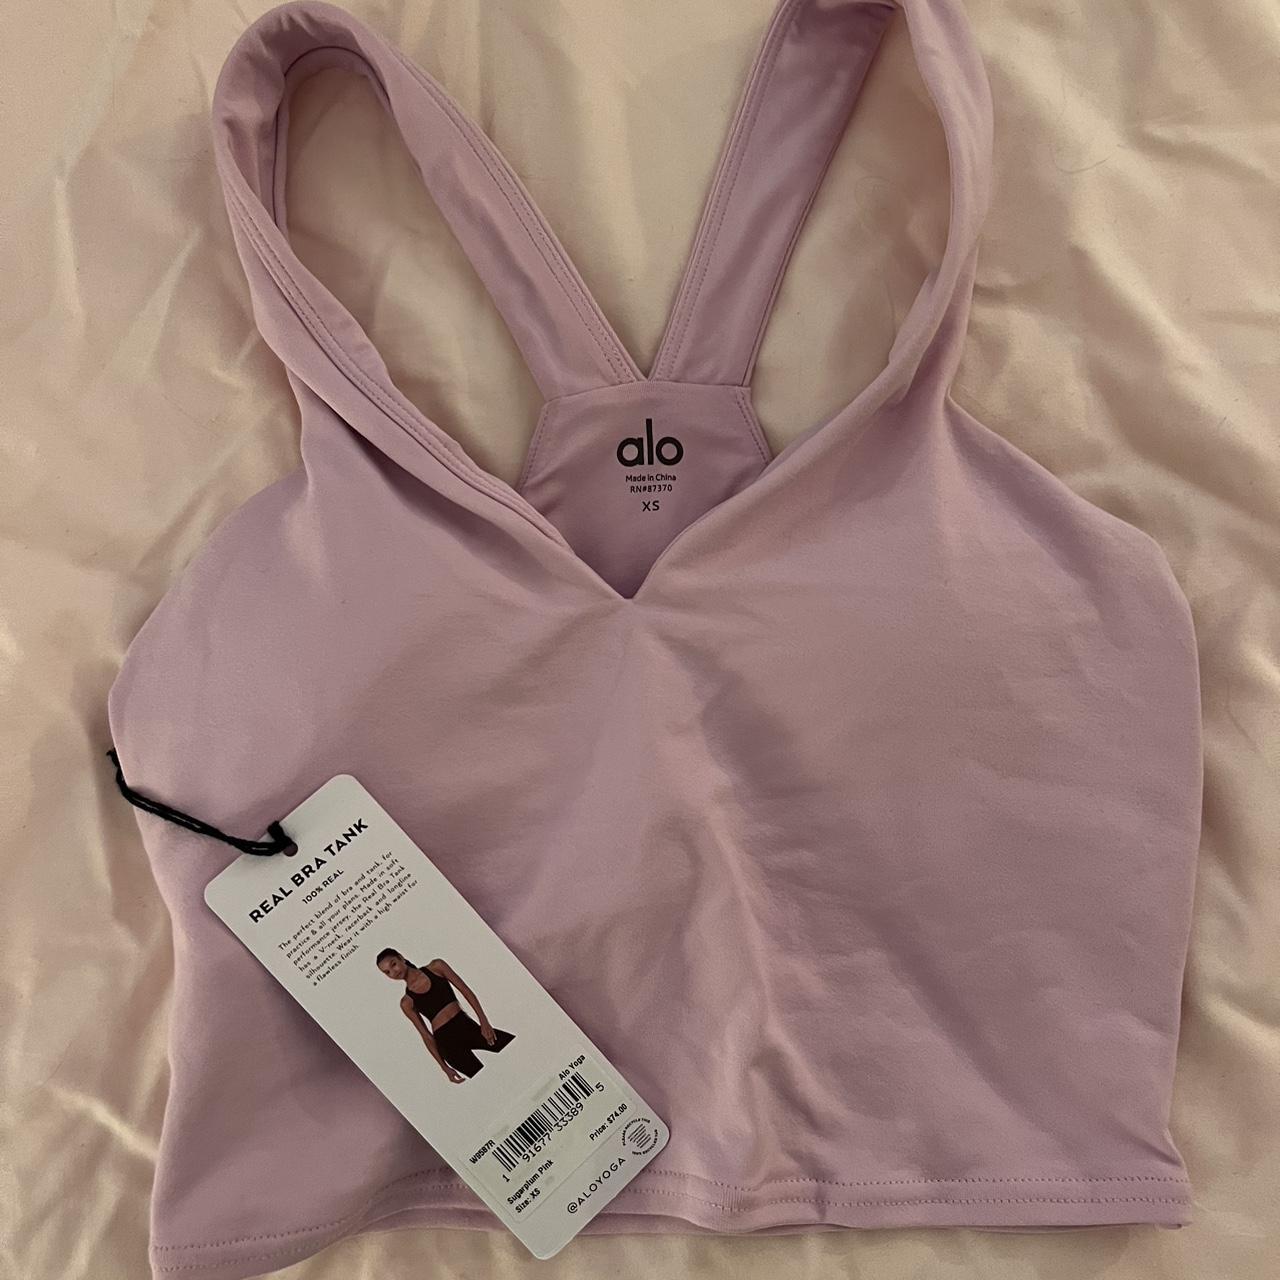 Ribbed Minimalist Tank Top in Pink Sugar by Alo Yoga